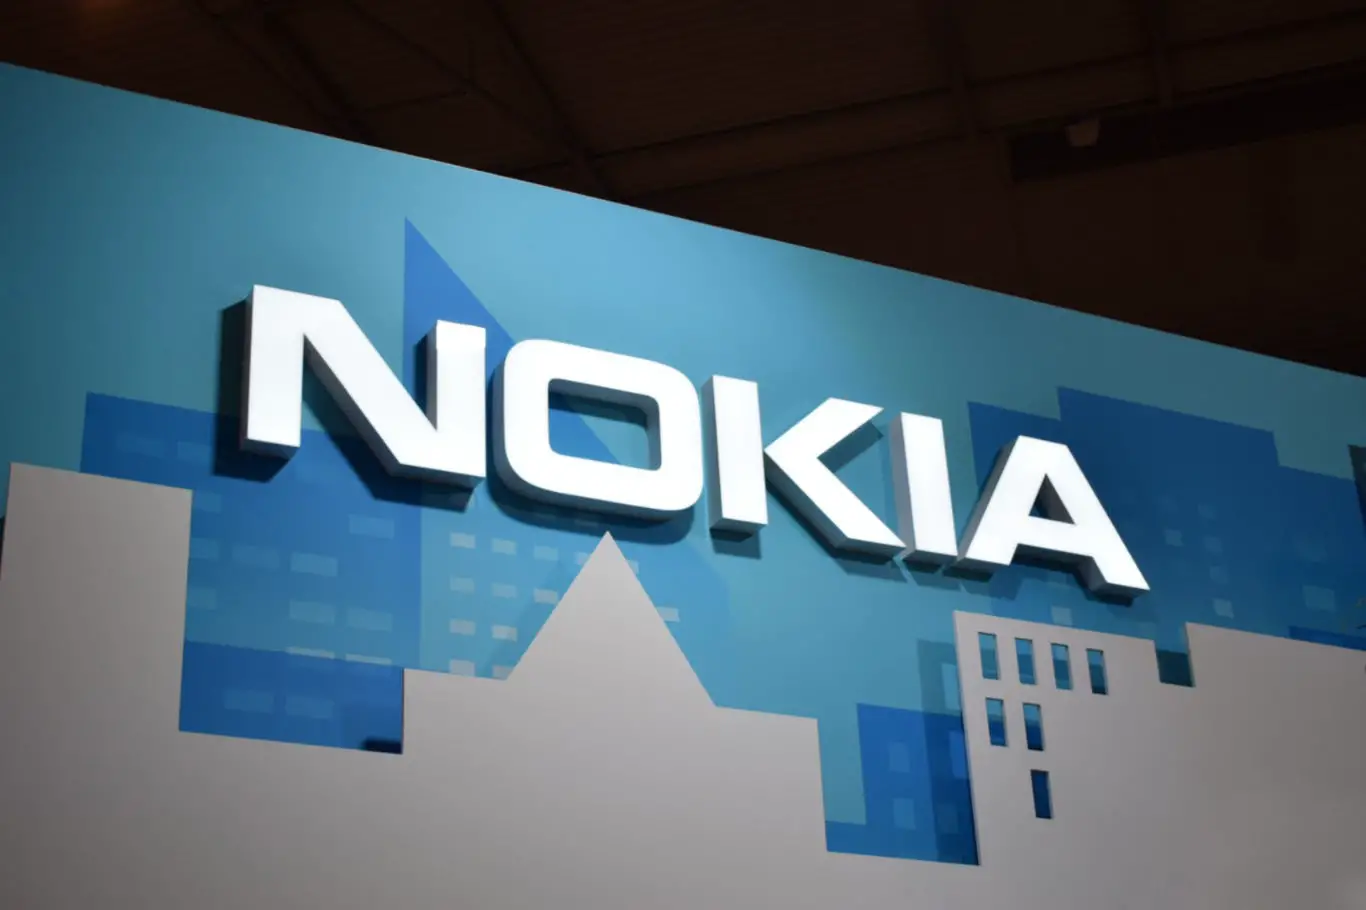 Nokia, Intel join hands for MeeGo - Times of India